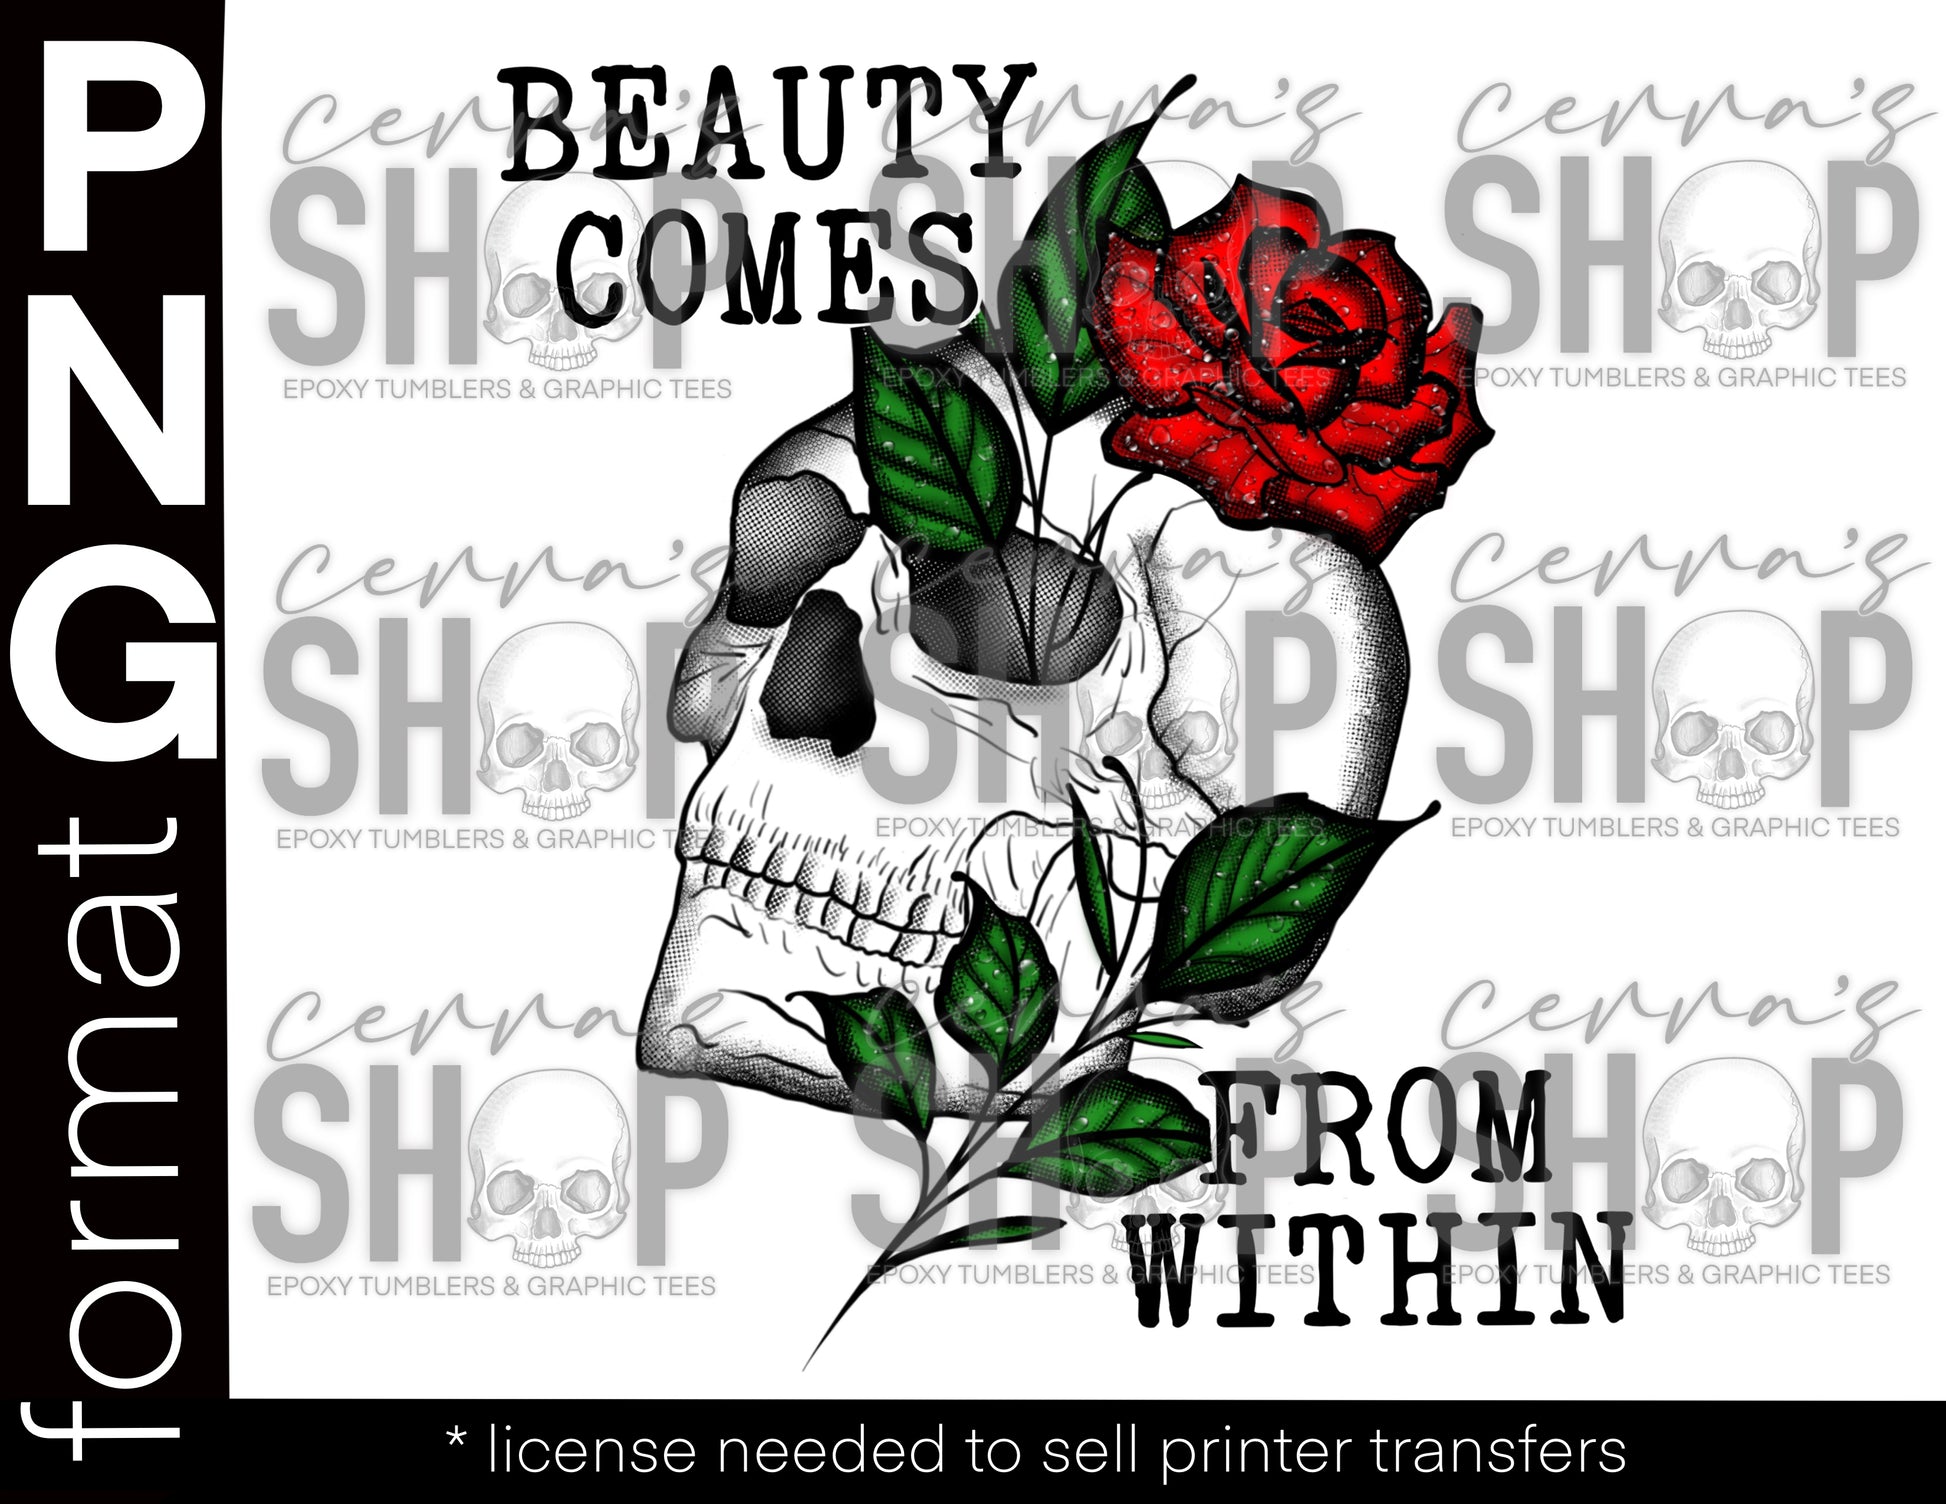 Beauty comes from within  Cerra's Shop Creates   